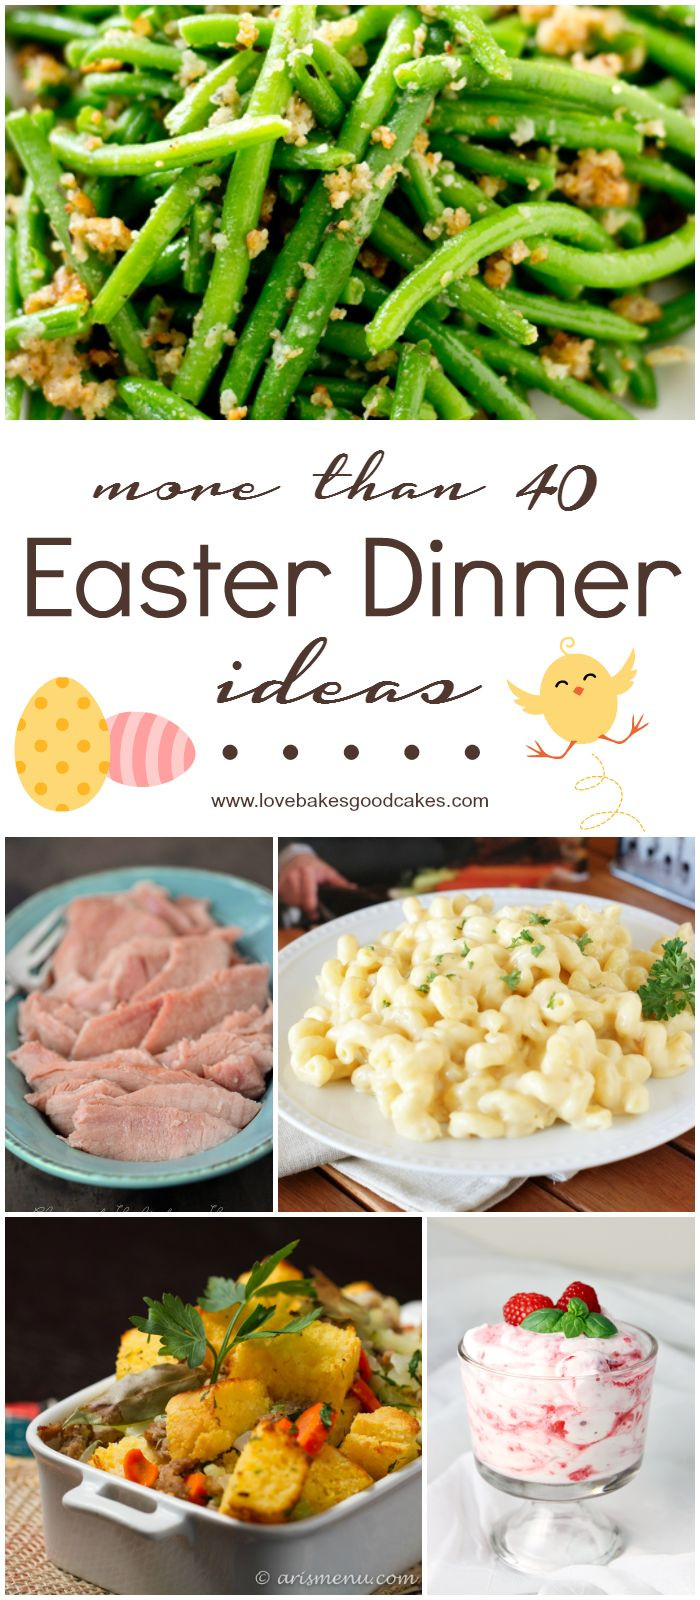 Healthy Easter Dinner
 25 best ideas about Easter on Pinterest